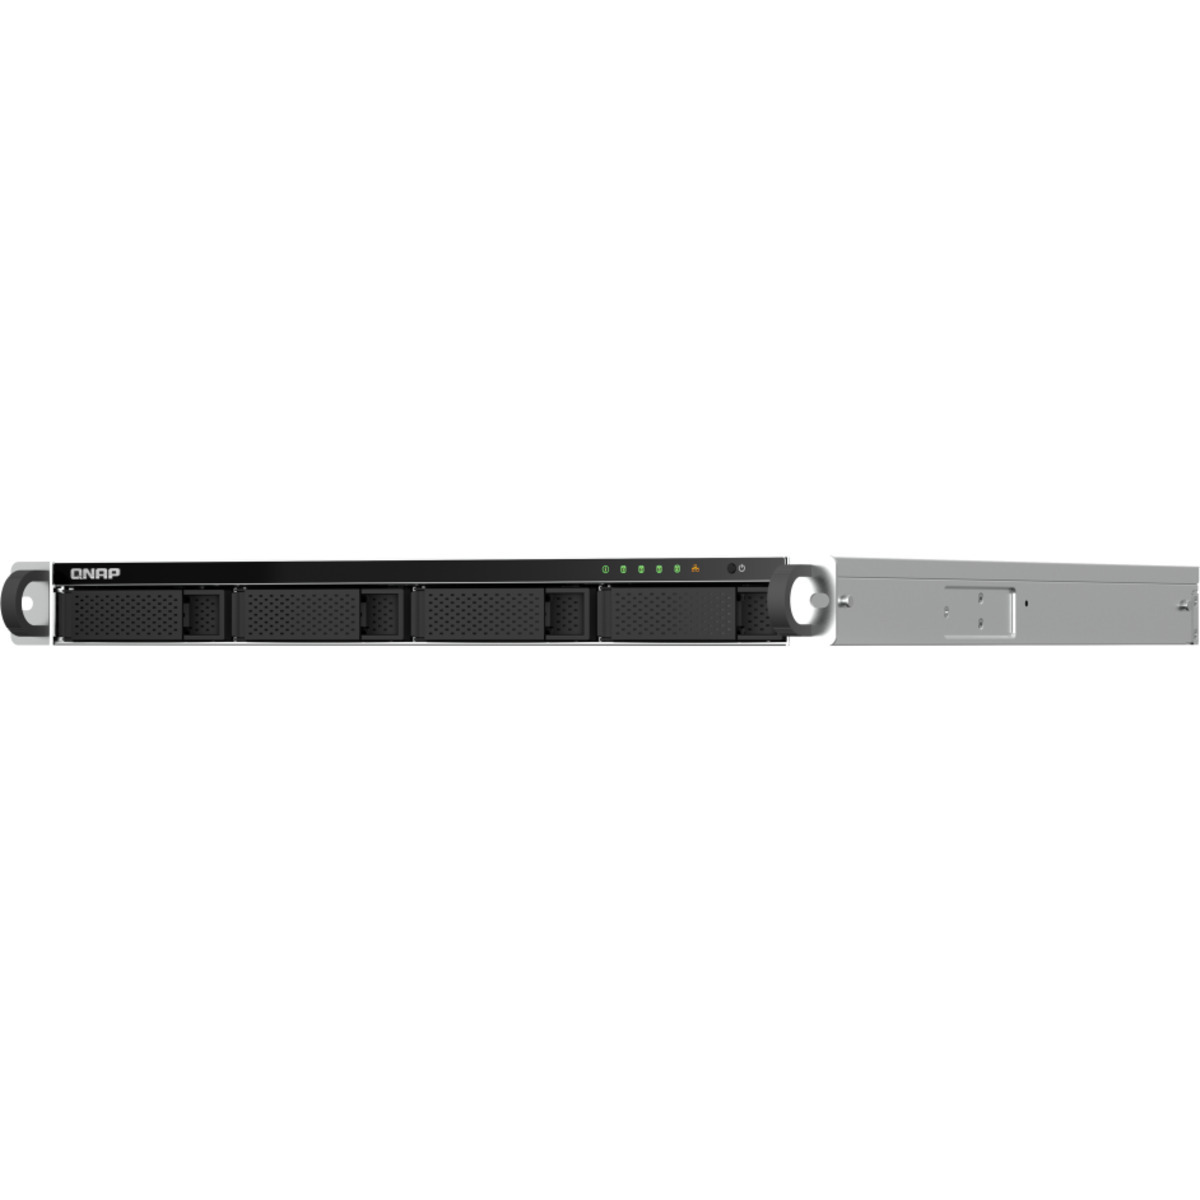 buy QNAP TS-464U-RP 8tb RackMount NAS - Network Attached Storage Device 4x2000gb Seagate IronWolf Pro ST2000NT001 3.5 7200rpm SATA 6Gb/s HDD NAS Class Drives Installed - Burn-In Tested - nas headquarters buy network attached storage server device das new raid-5 free shipping usa spring sale TS-464U-RP